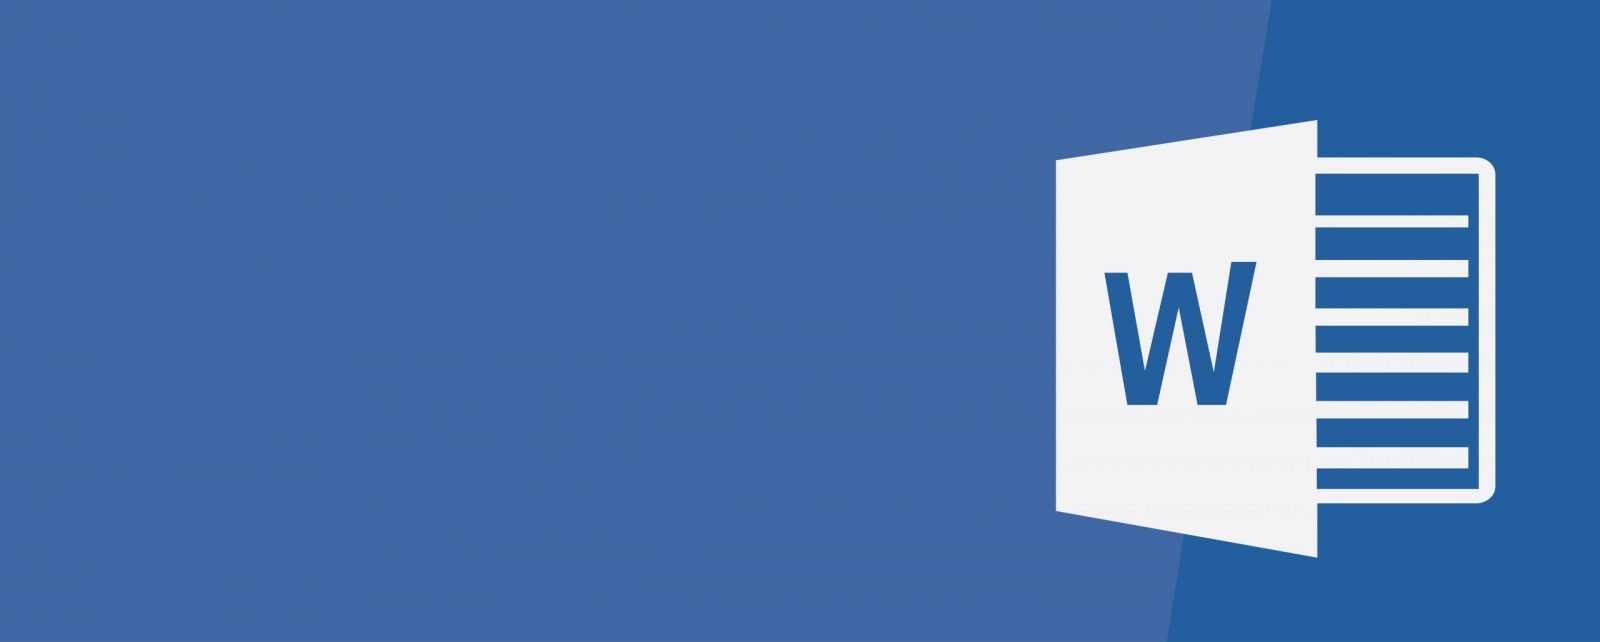 Microsoft-software-logos-word-scaled